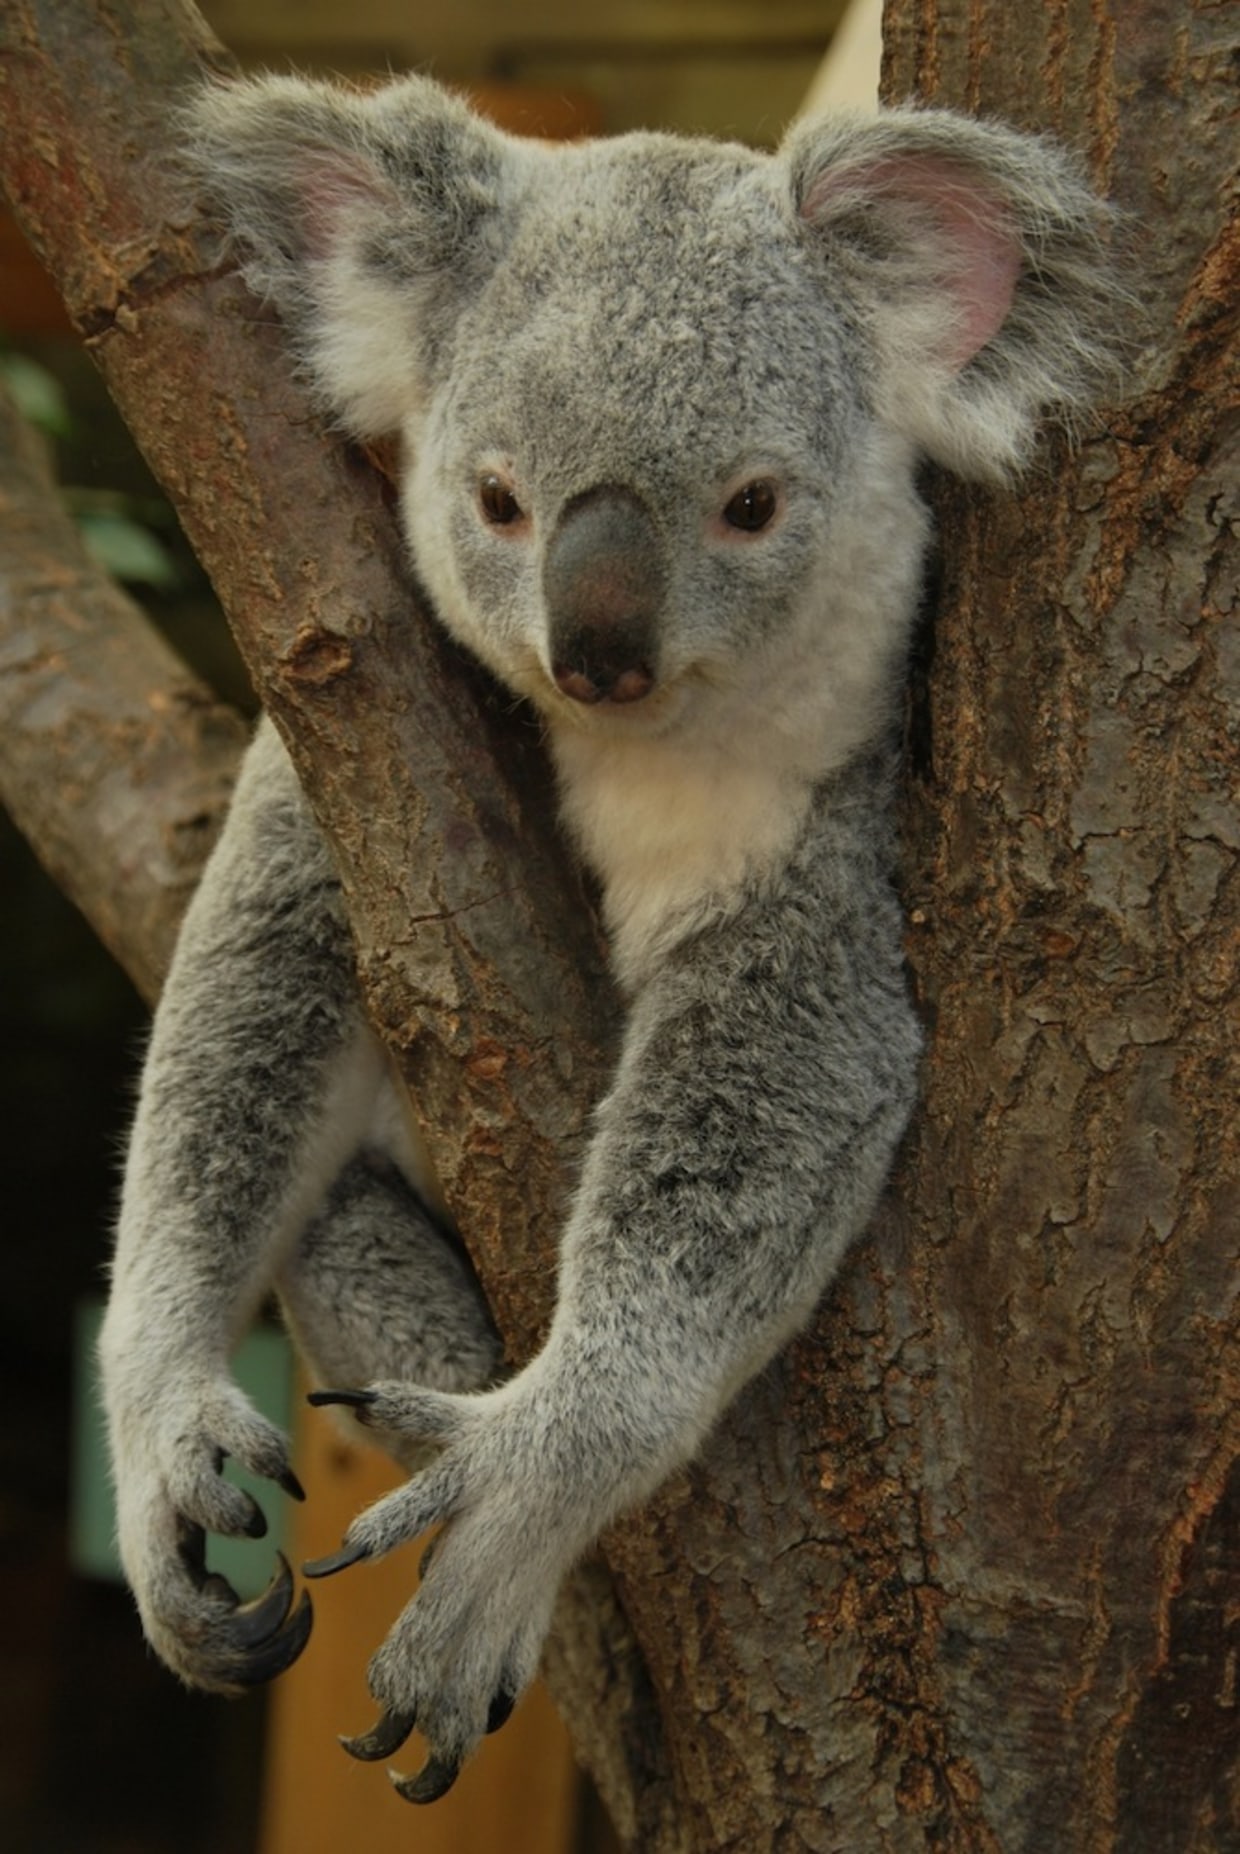 Lonely koalas long ago turned to kin for sex